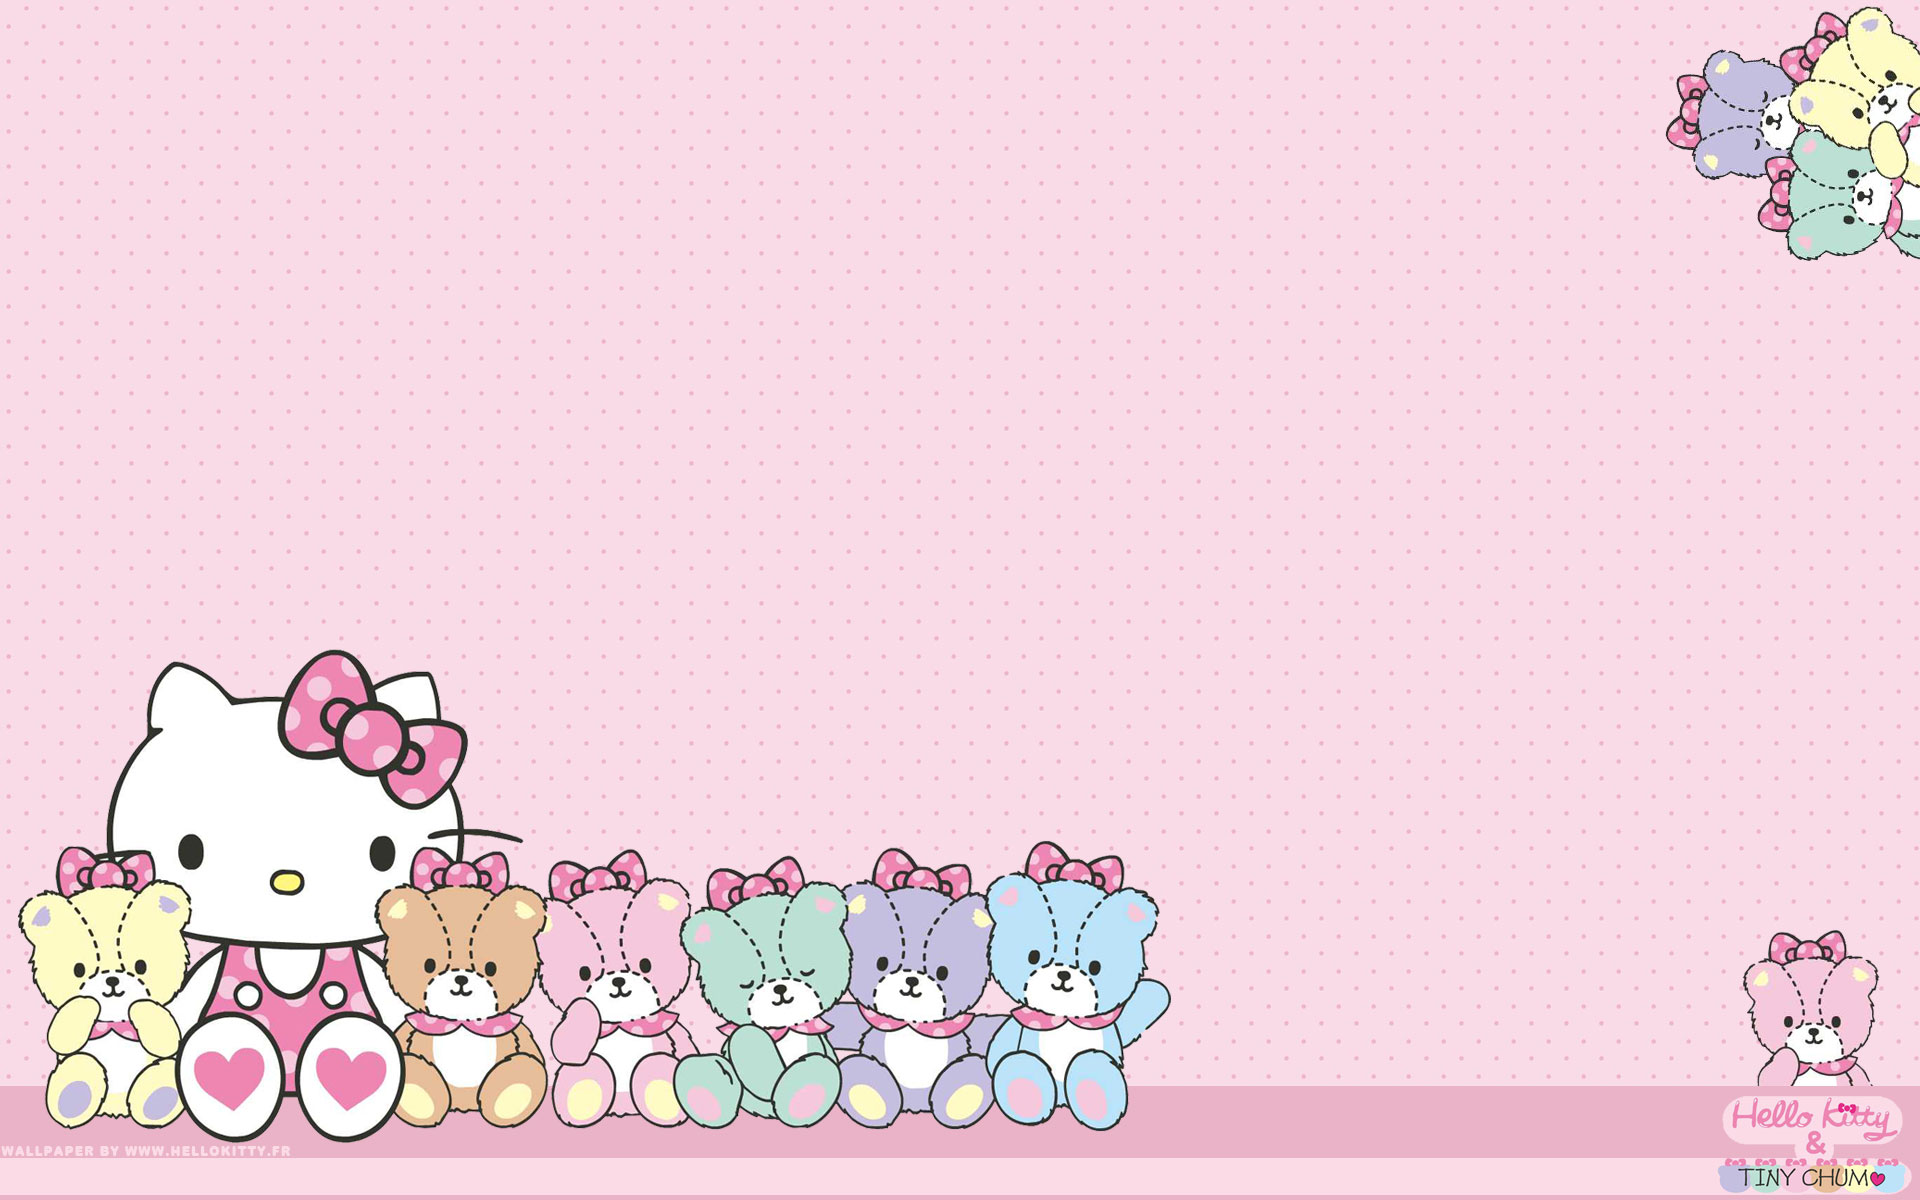 Free Download Hello Kitty Wallpaper Wallpapers Wallpaper Amanda 19x10 19x10 For Your Desktop Mobile Tablet Explore 78 Hellokitty Backgrounds Hello Kitty Wallpapers Cute Kitty Wallpaper